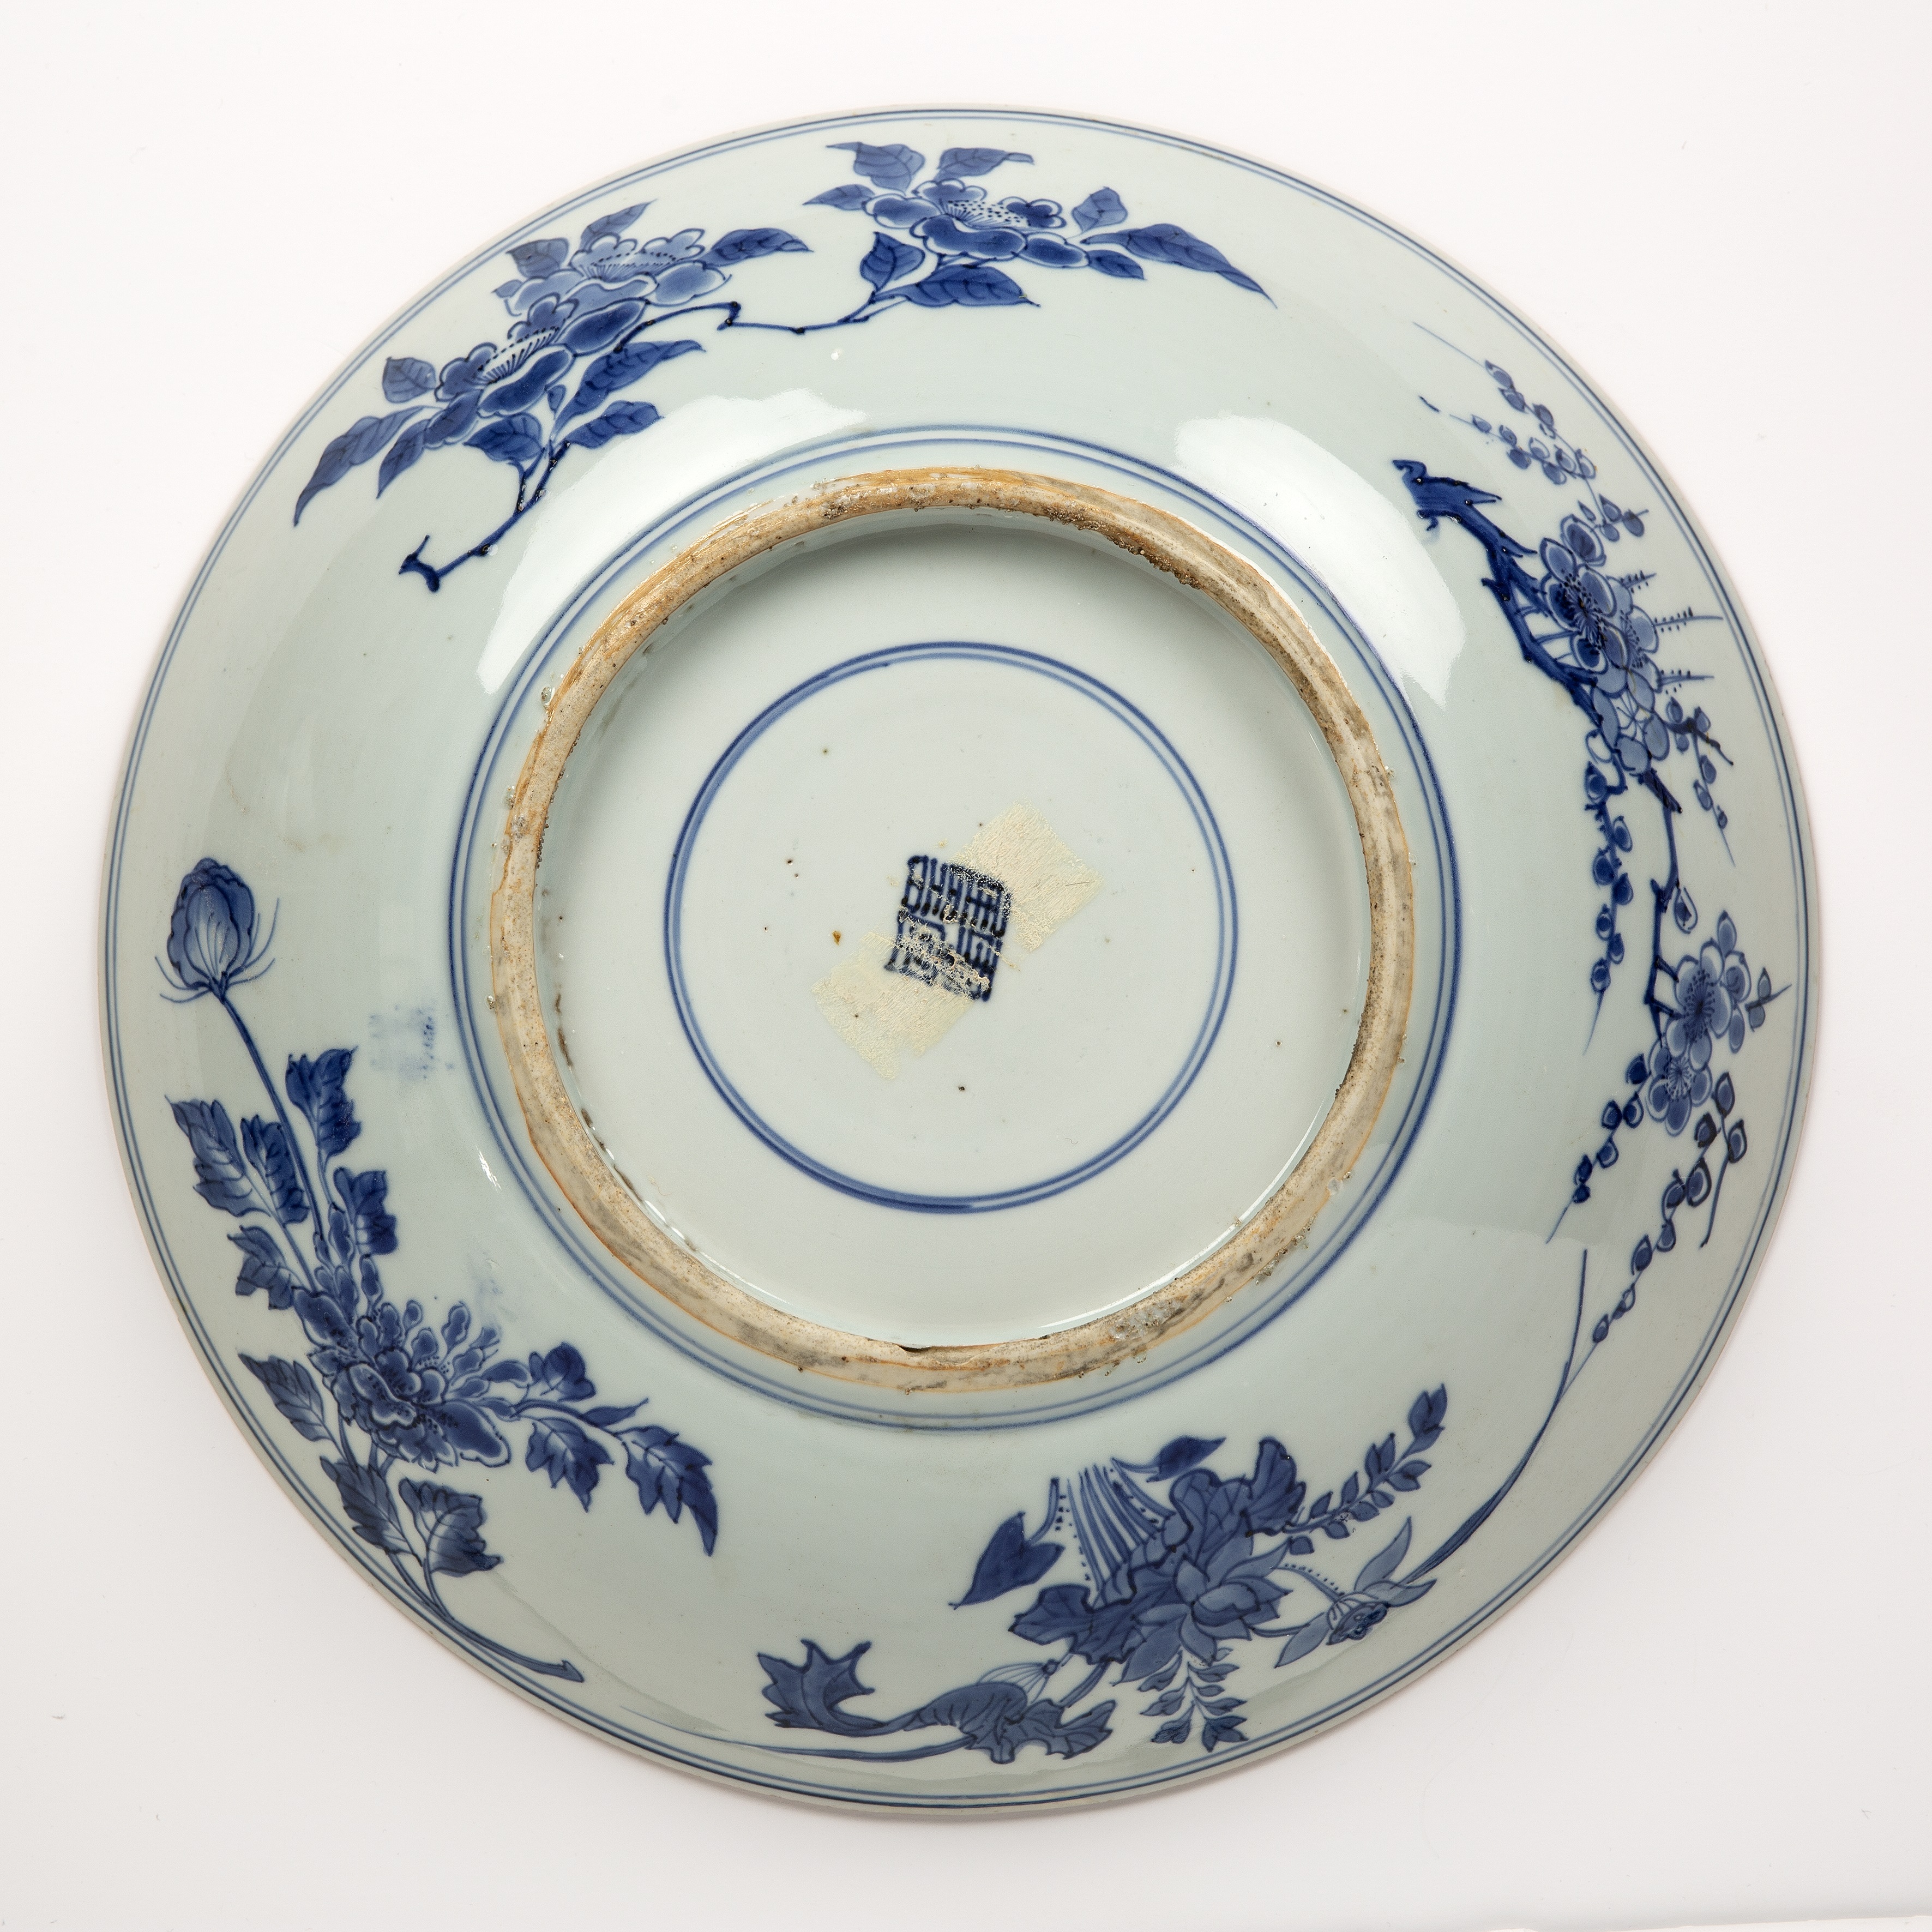 Blue and white porcelain charger Chinese, Shunzi period, circa 1650-1660 painted with qilin and - Image 3 of 14